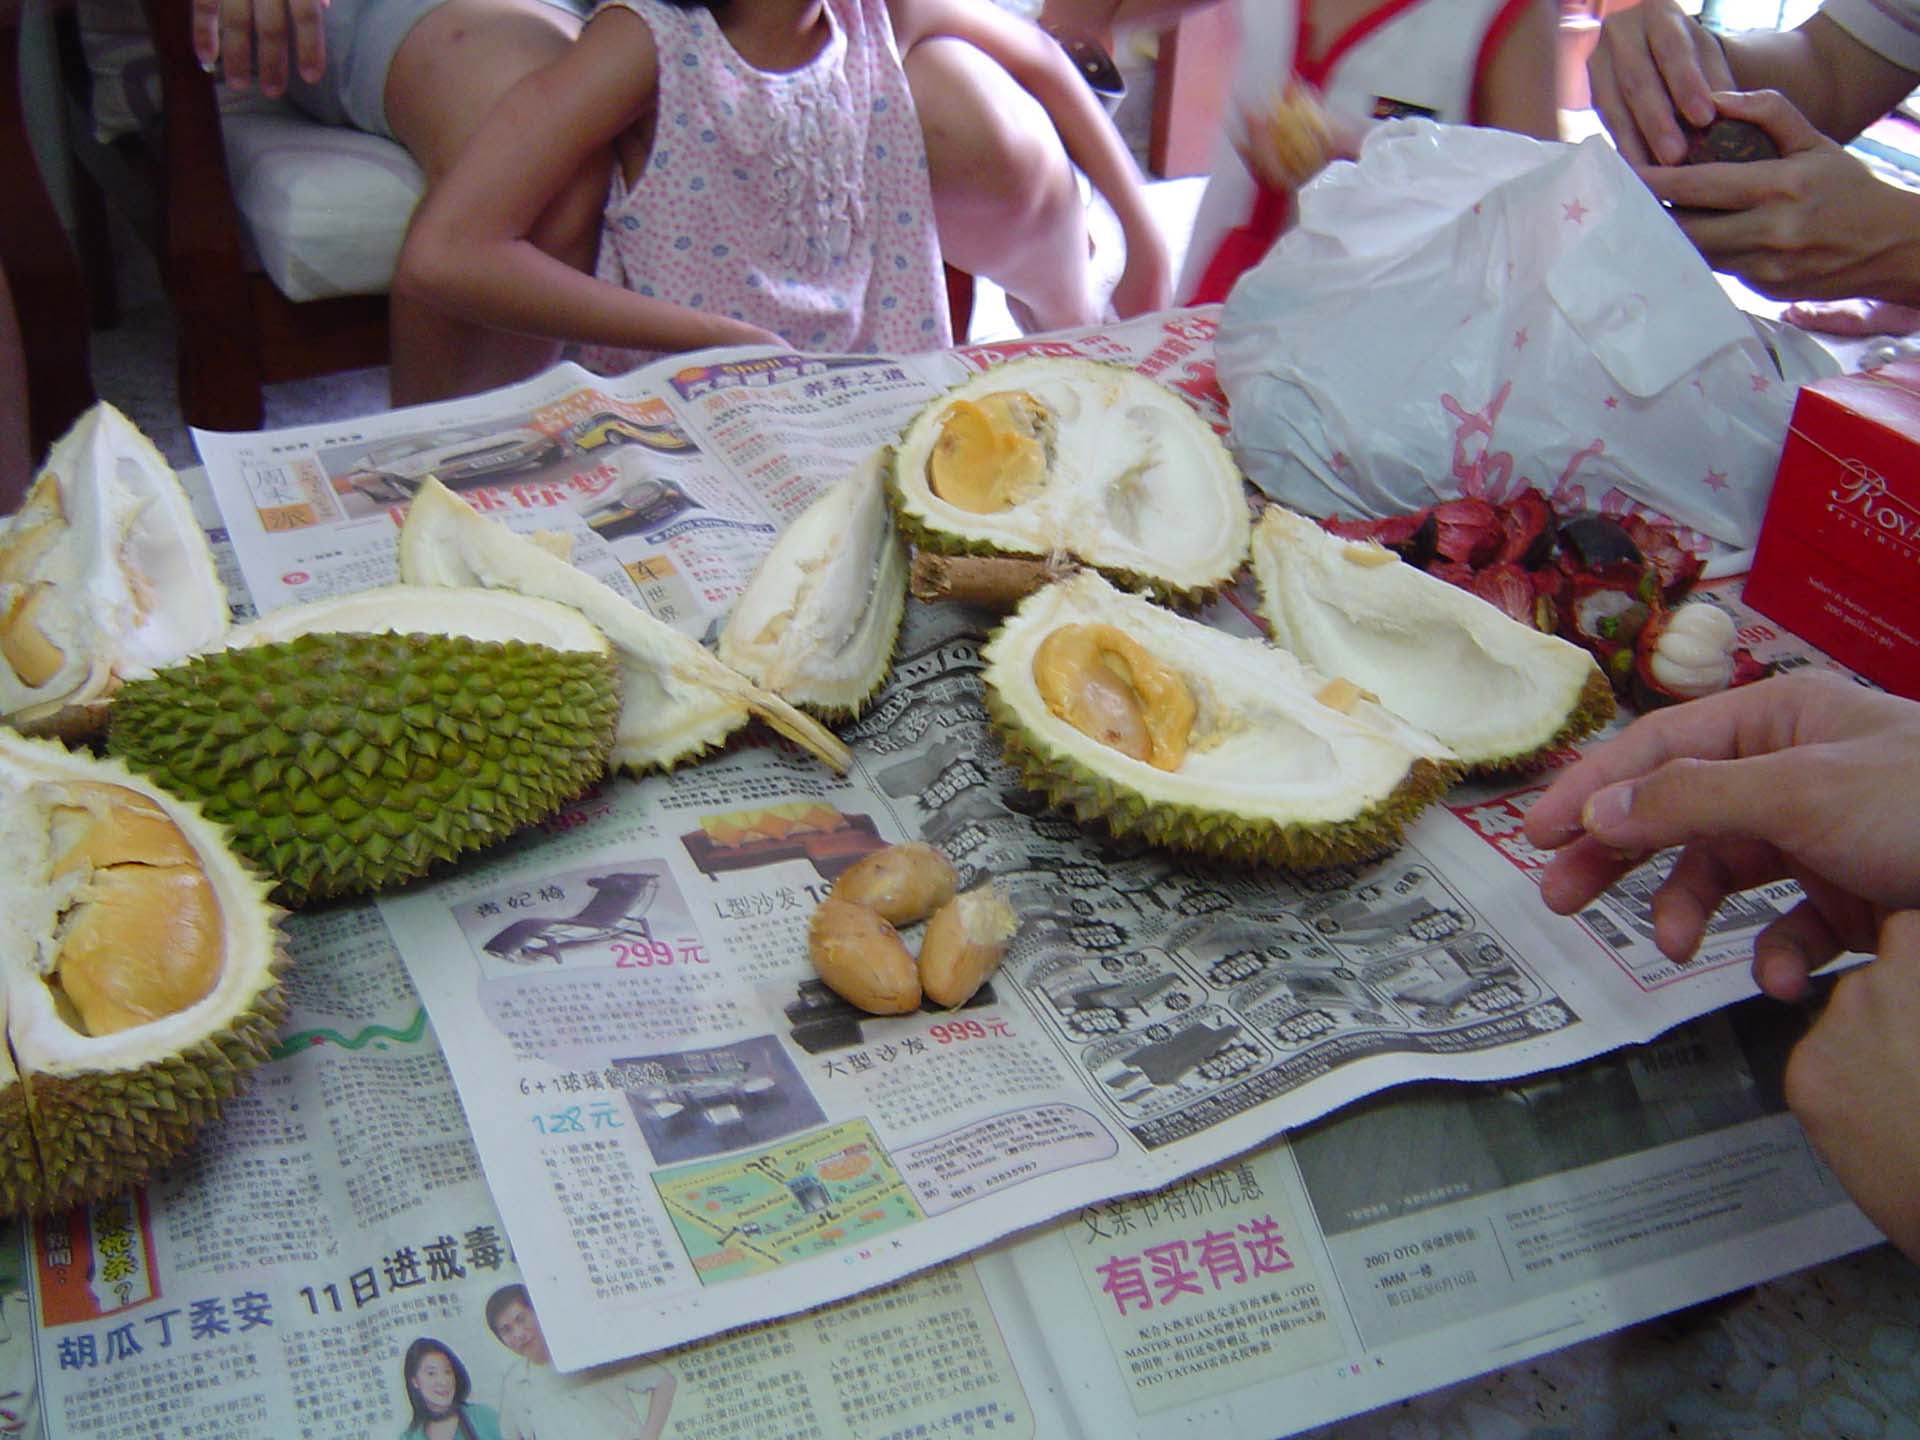 A spread of split durian, still in its spiky green rind, spread on top of sheets of newspaper.